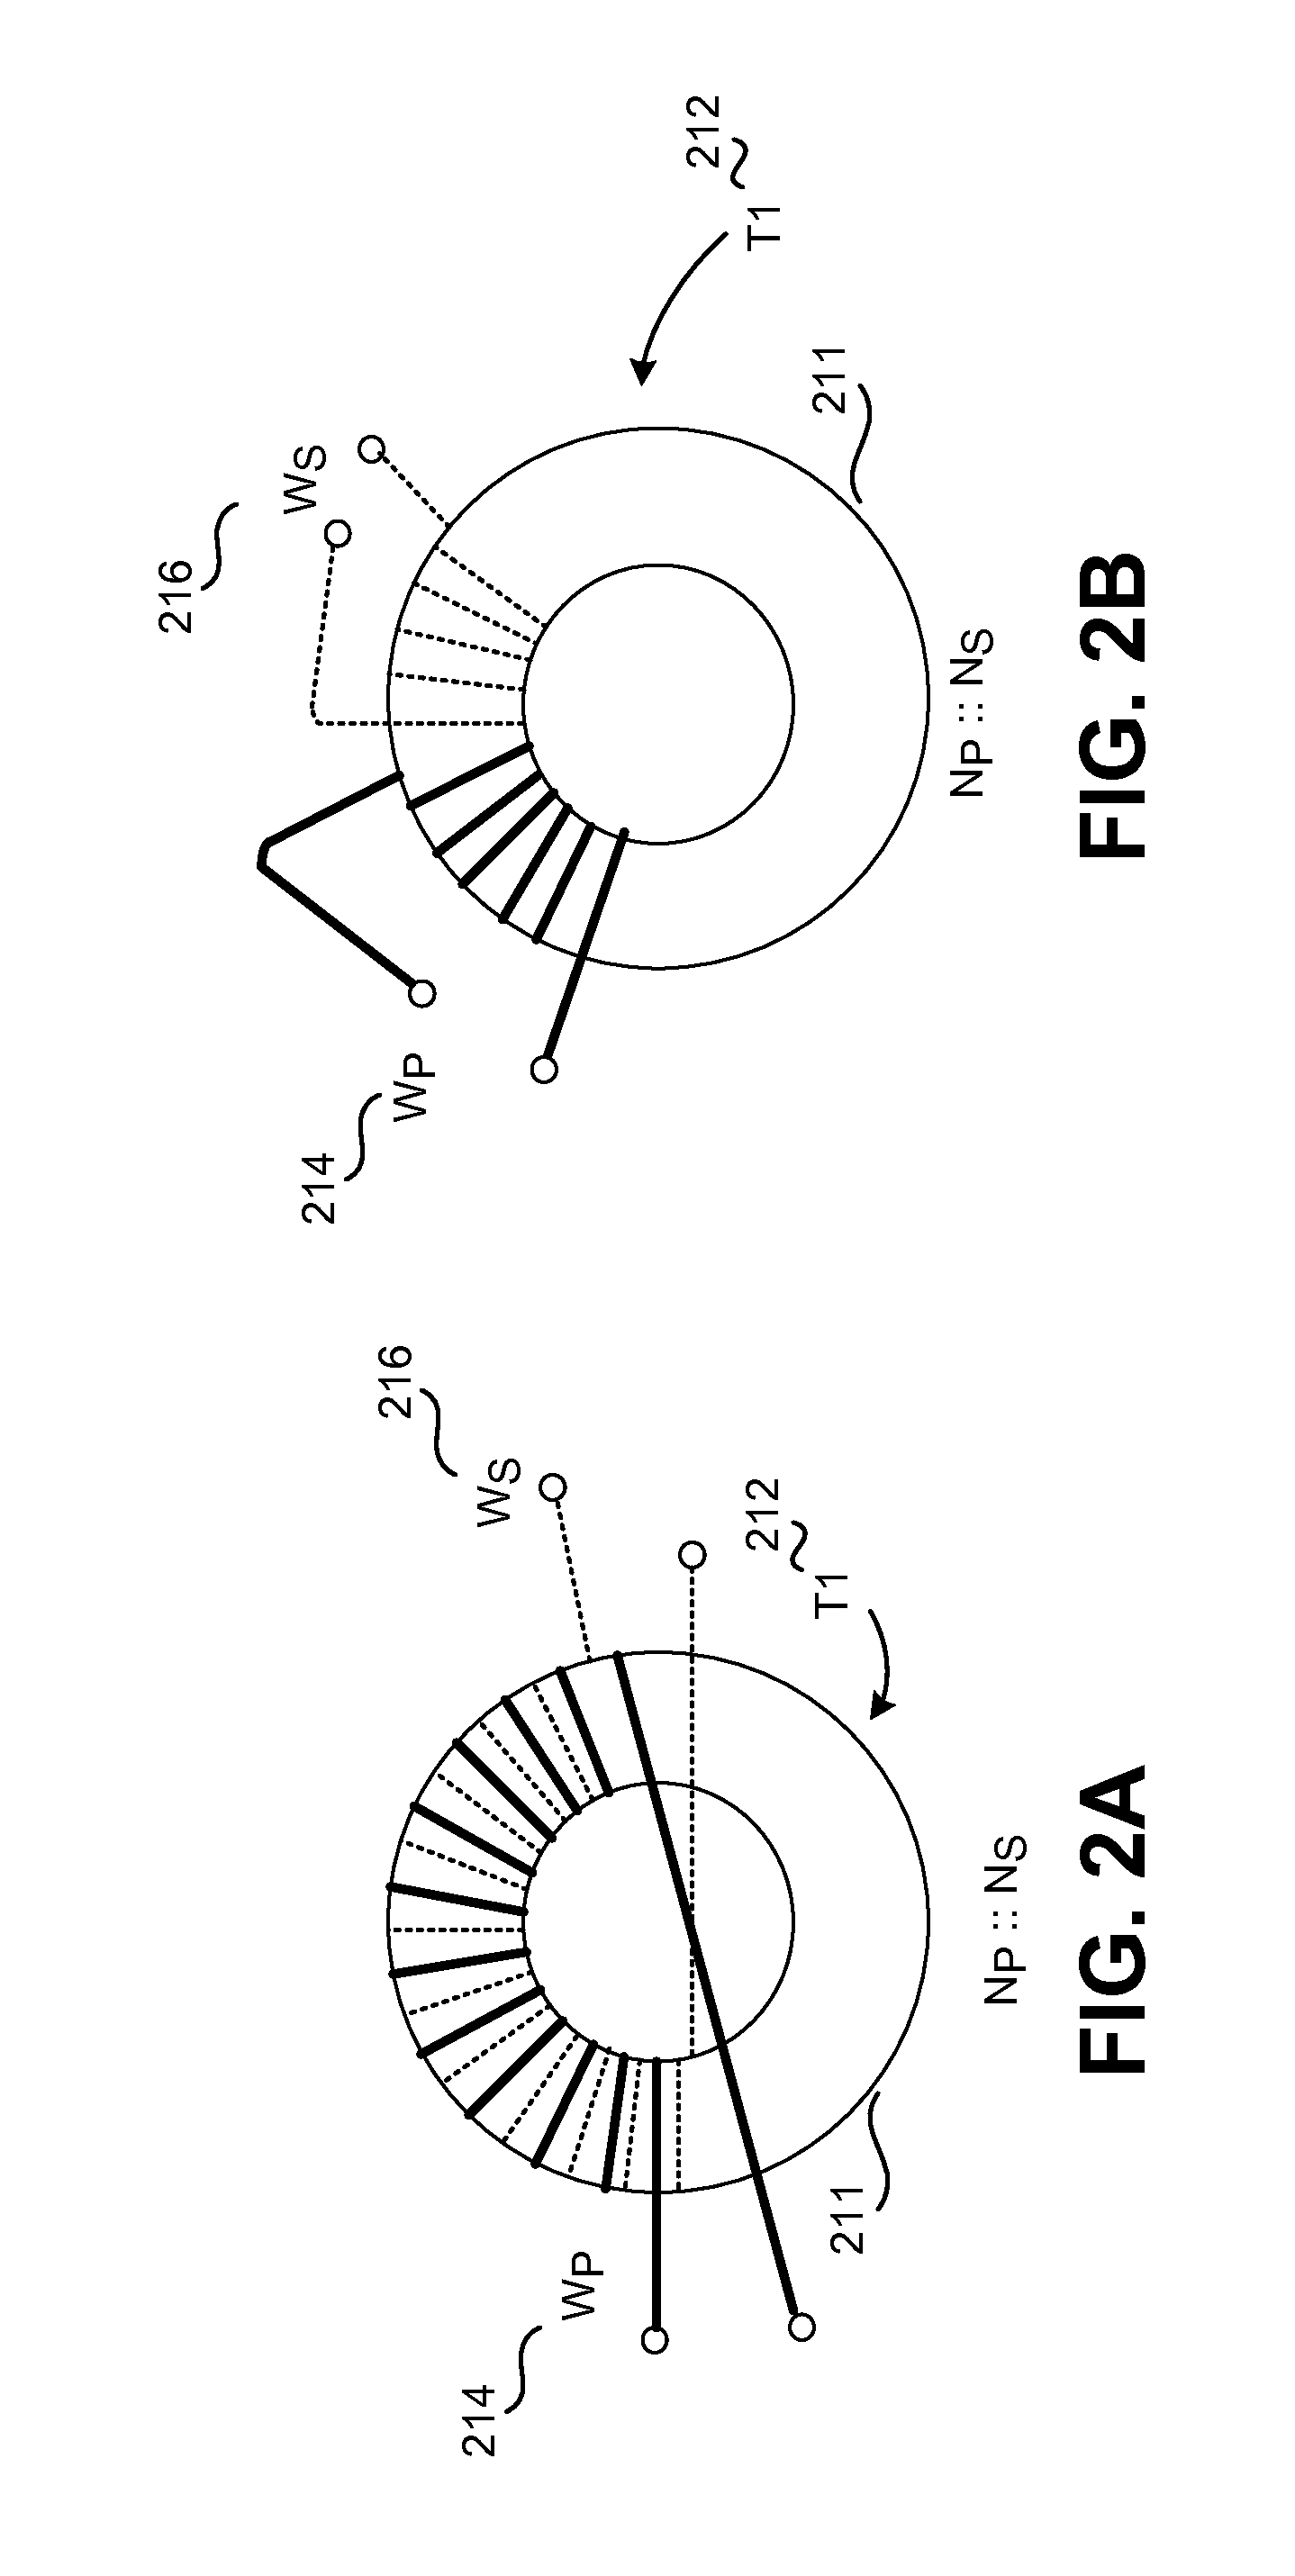 Switch controller with validation circuit for improved noise immunity